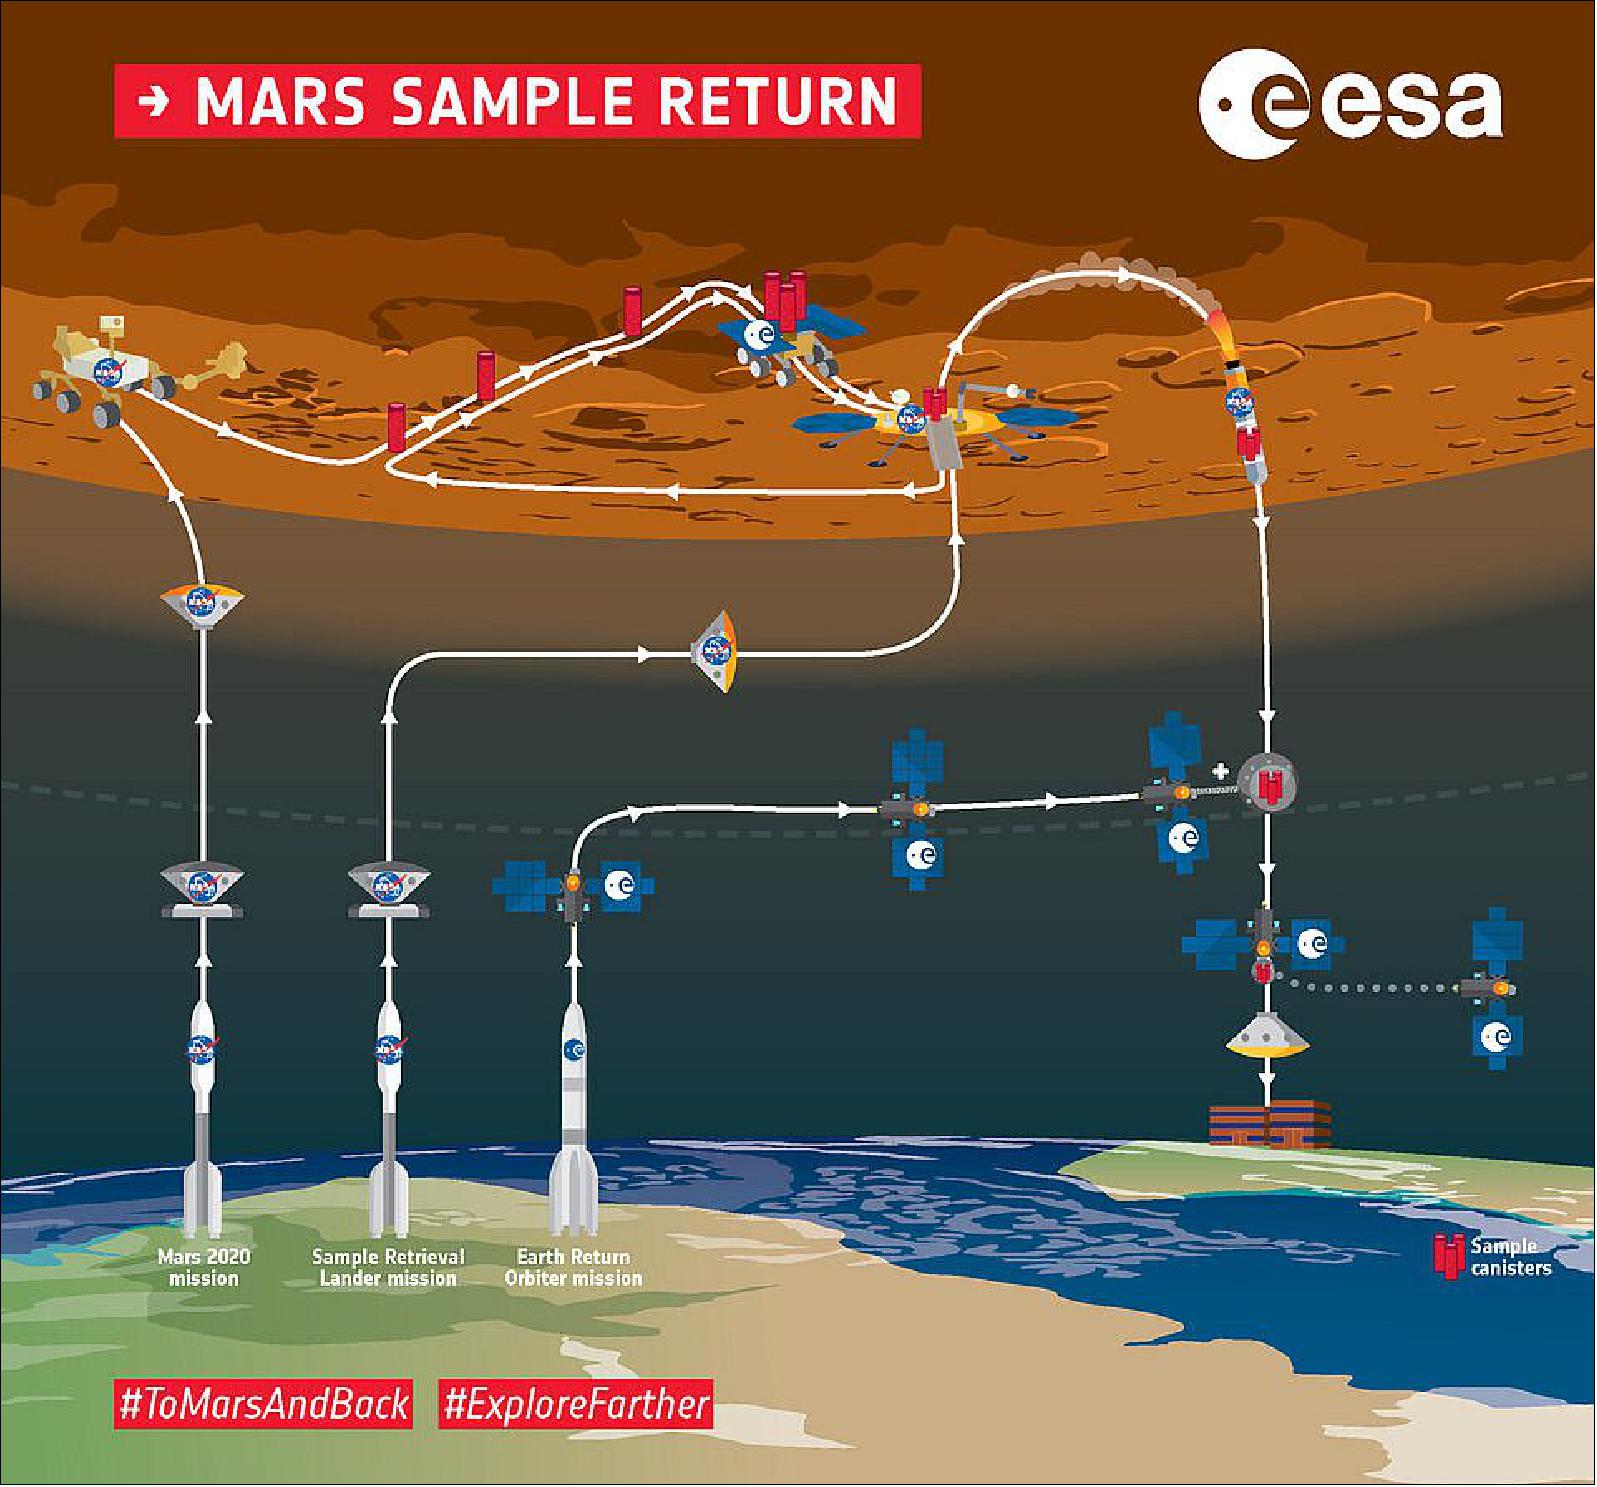 Figure 57: Overview of the ESA–NASA Mars Sample Return mission. Bringing samples from Mars is the logical next step for robotic exploration and it will require multiple missions that will be more challenging and more advanced than any robotic missions before. Accomplishments in robotic exploration in recent years have increased confidence in success – multiple launches will be necessary to deliver samples from Mars. ESA is working with NASA to explore mission concepts for an international Mars Sample Return campaign between 2020 and 2030. — Three launches will be necessary to accomplish landing, collecting, storing and finding samples and delivering them to Earth. NASA's Mars 2020 mission will explore the surface and rigorously document and store a set of samples in canisters in strategic areas to be retrieved later for flight to Earth. Two subsequent missions are foreseen to achieve this next step (image credit: ESA, K. Oldenburg)